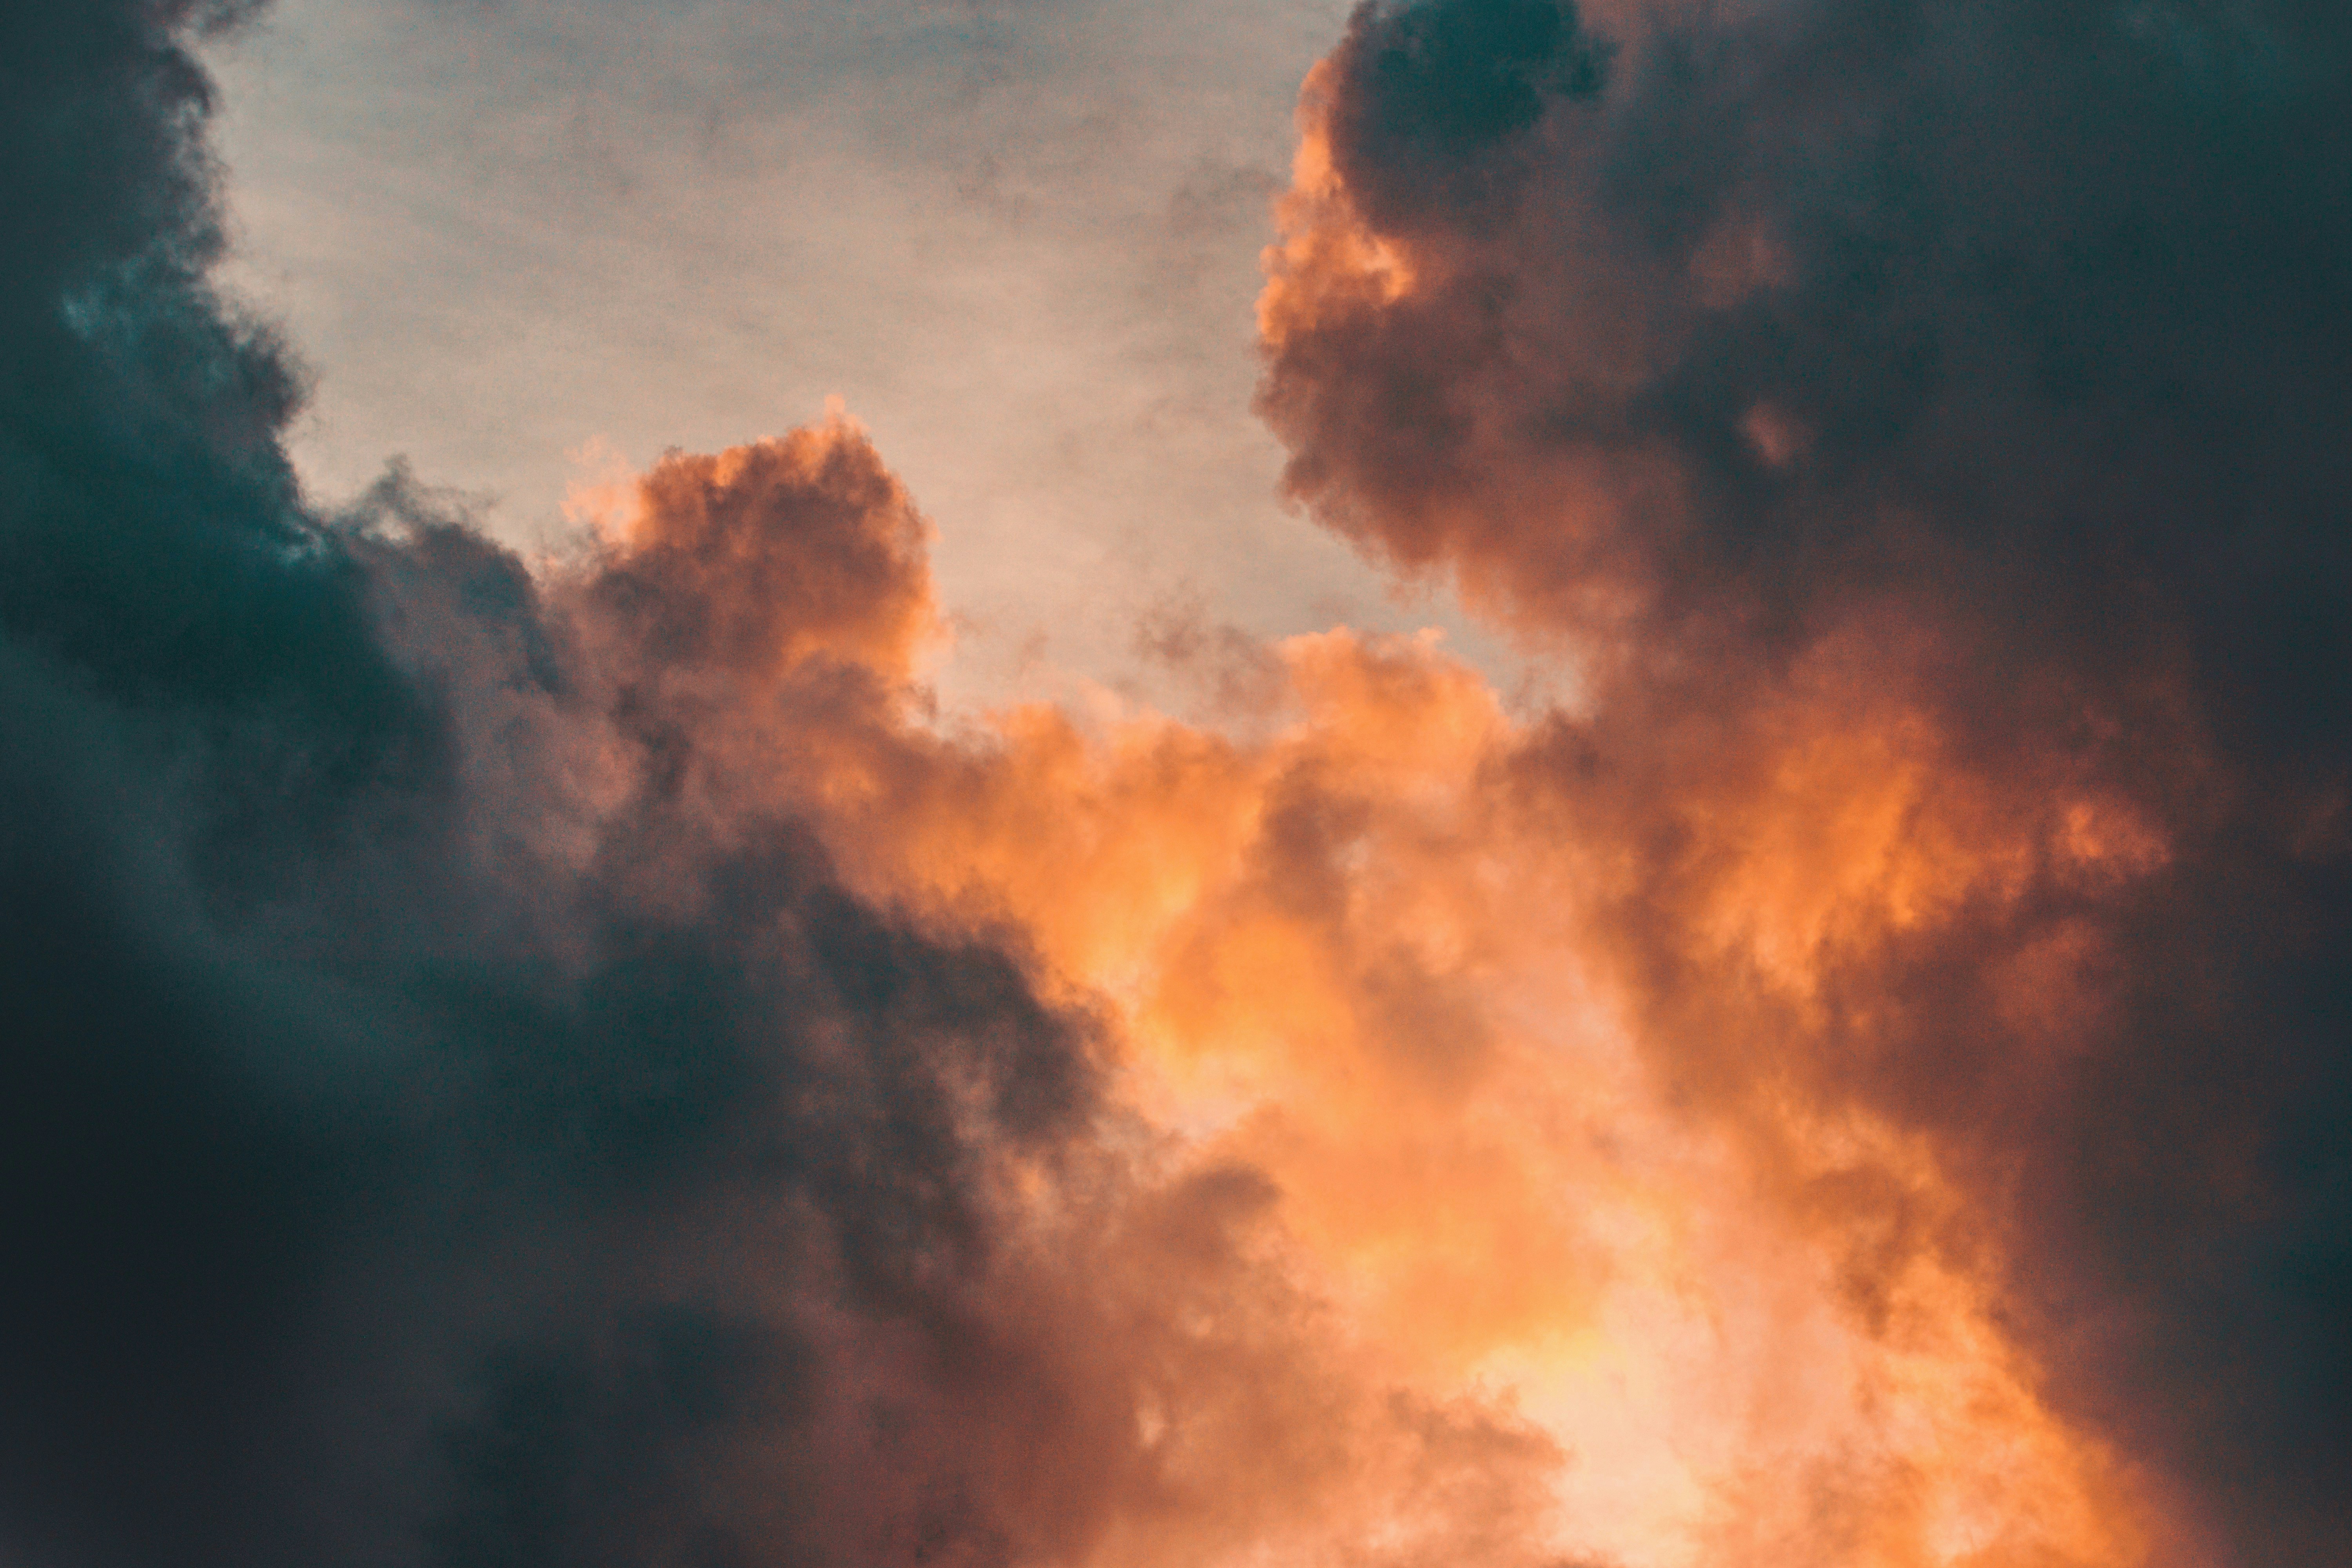 Choose from a curated selection of cloud photos. Always free on Unsplash.